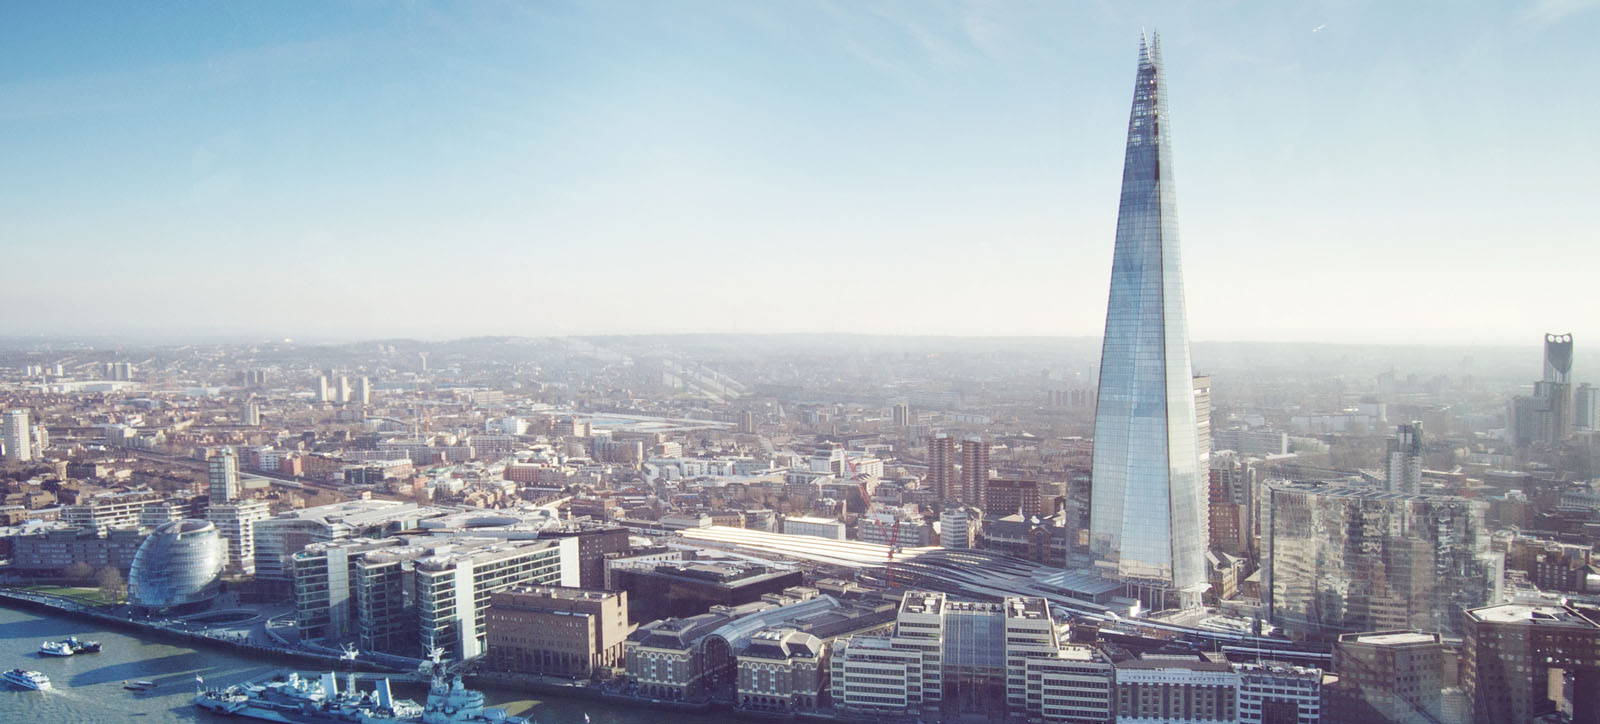 WBS hosted the first Gillmore Centre for Financial Technology annual conference at The Shard